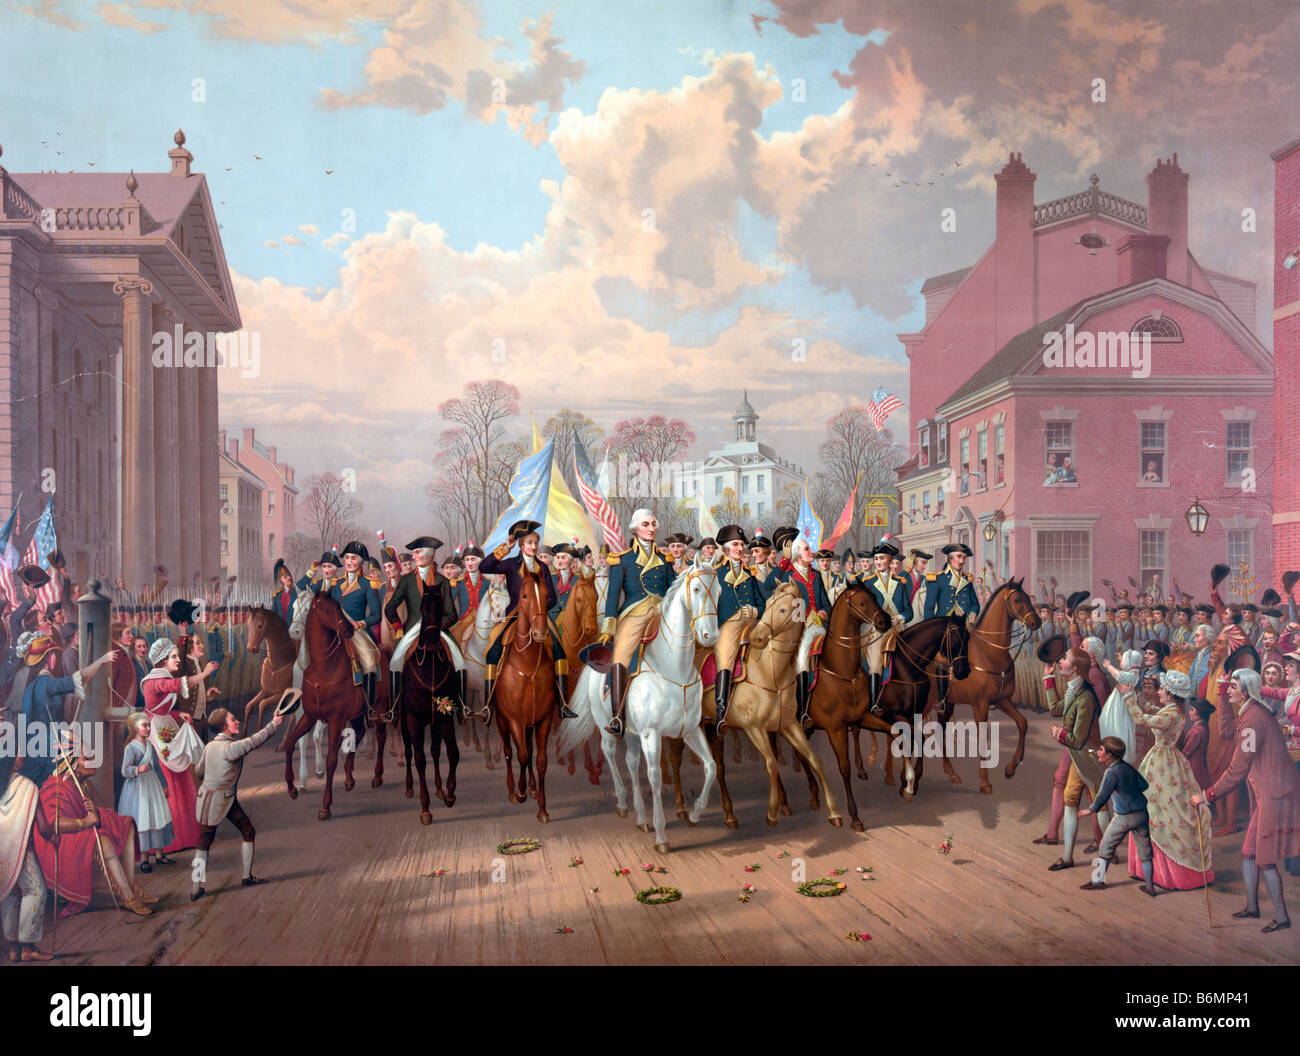 Print showing George Washington and other military officers riding on horseback along street, spectators line the street Stock Photo